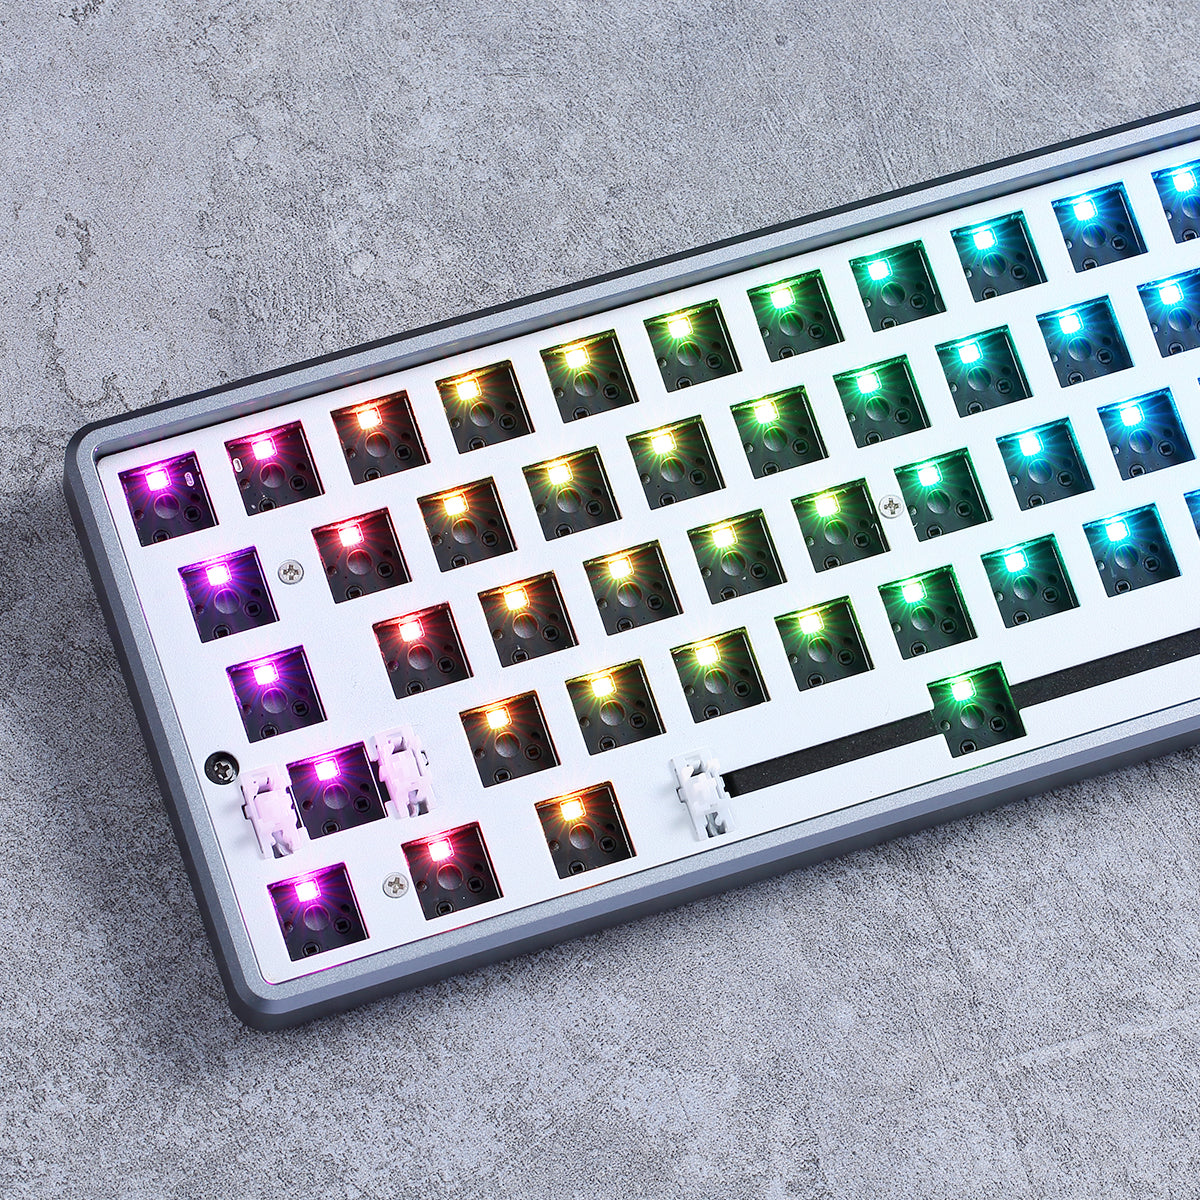 What are the parts of a custom keyboard?